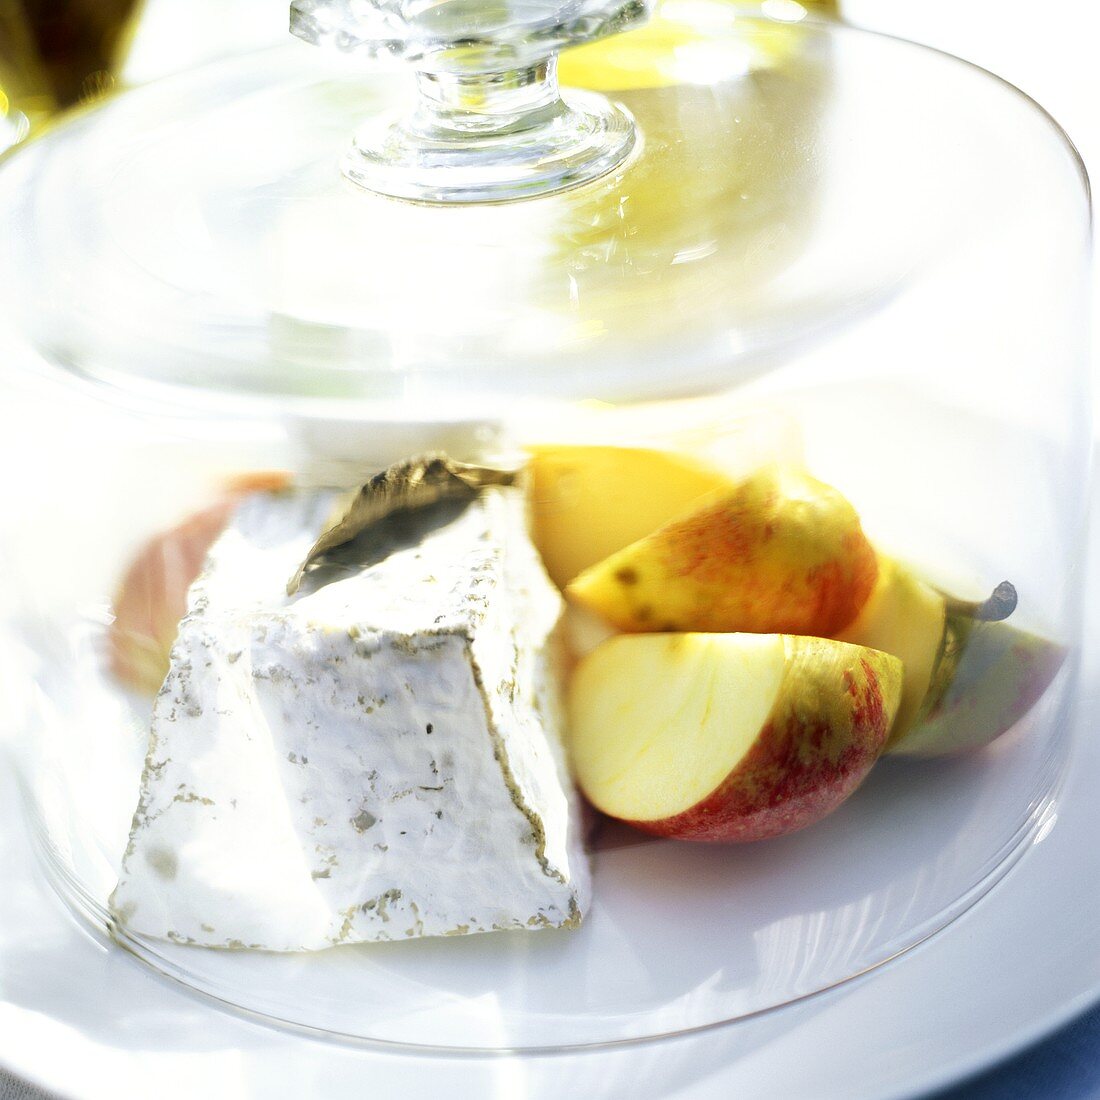 Goat Cheese with Apples